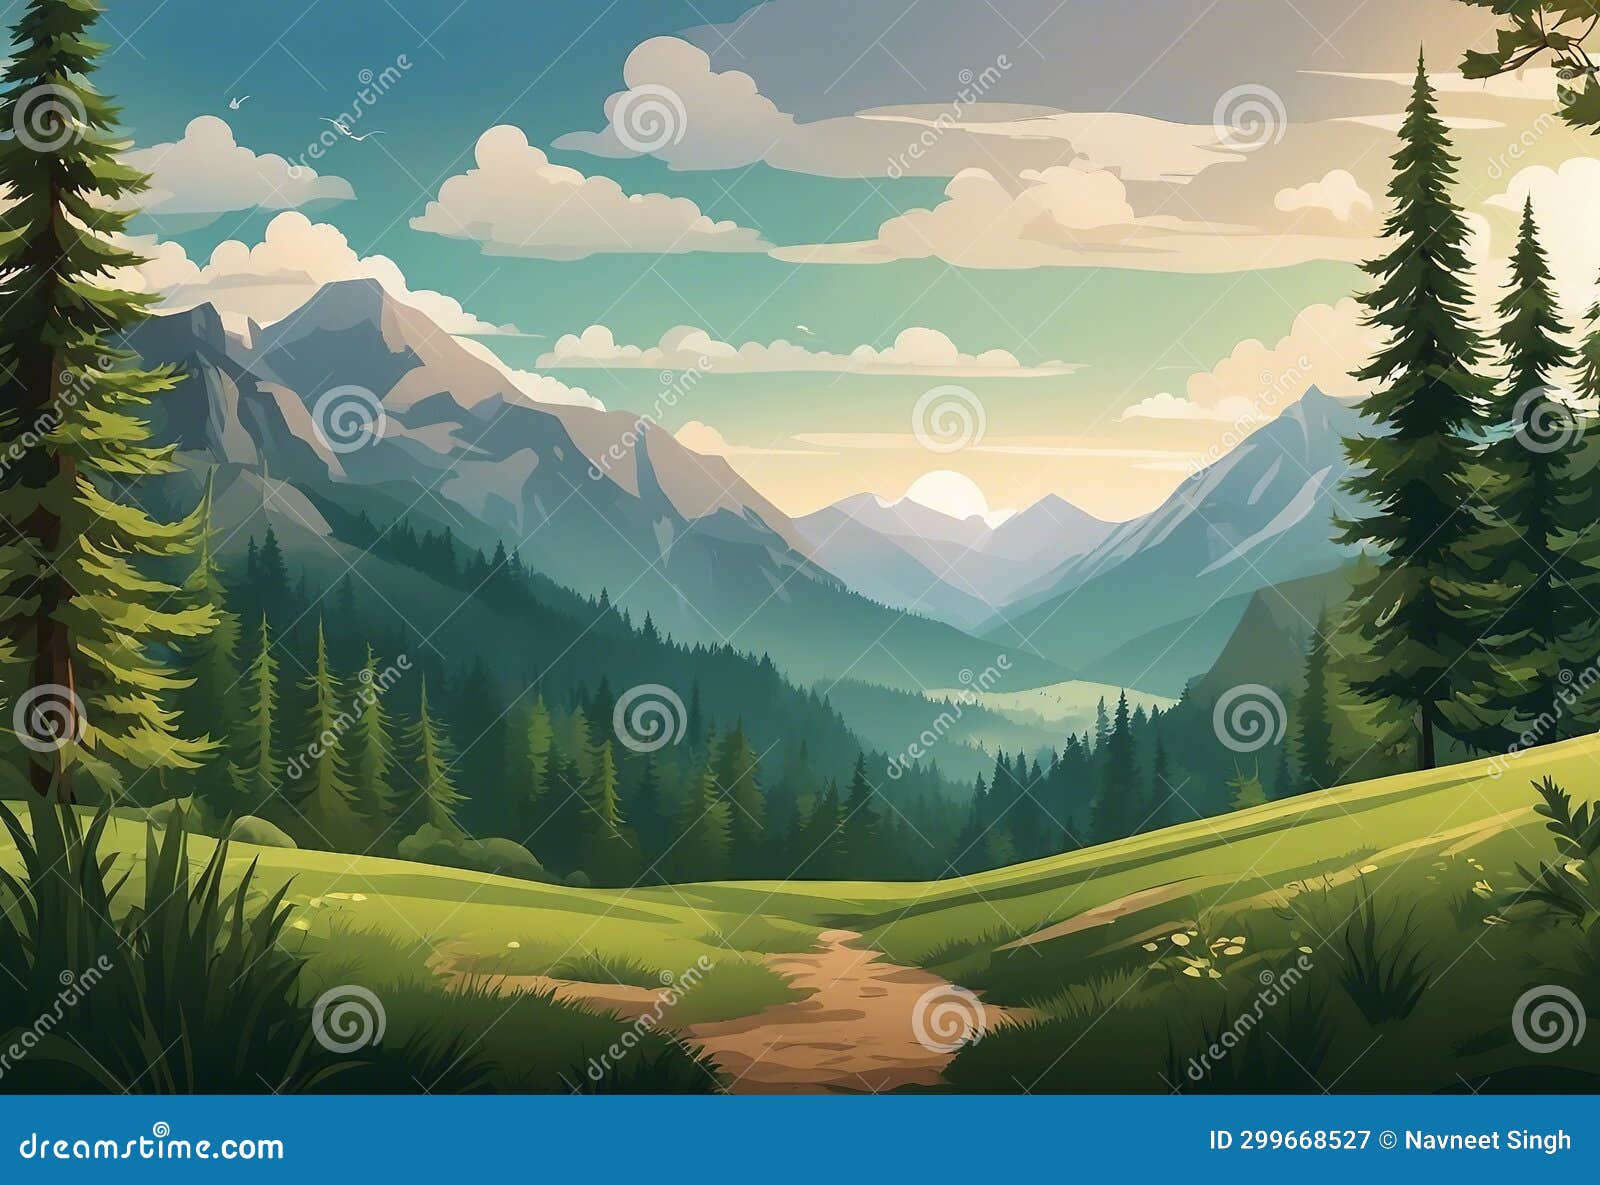 Beautiful Landscape Vector Illustration of Coniferous Forest with ...